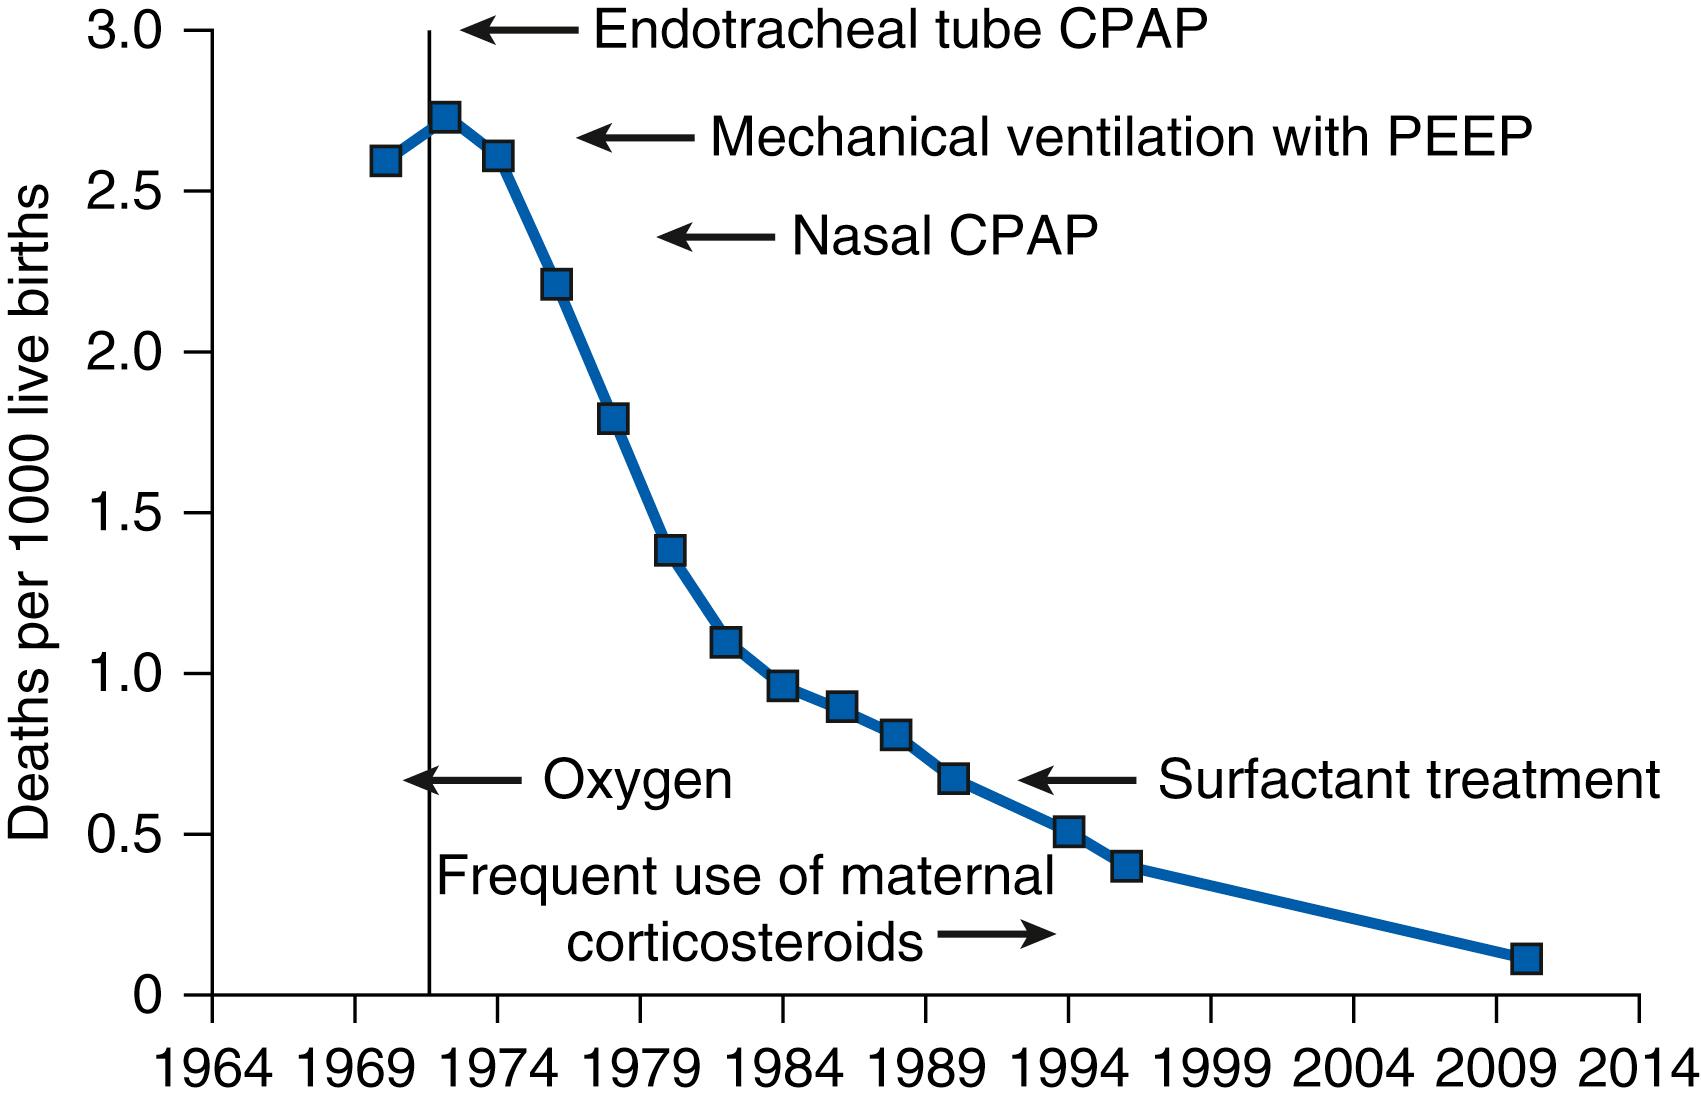 Fig. 157.1, Deaths from respiratory distress syndrome (RDS) in the United States from 1968 to 2010. The curve shows deaths from RDS in preterm infants per 1000 live births. The curve for the striking decrease in death is annotated for innovations that improved outcomes for infants with RDS. The infants who died in the 1960s and 1970s were larger and more mature than the few infants who now die of RDS. CPAP, Continuous positive airway pressure; PEEP, positive end-expiratory pressure.